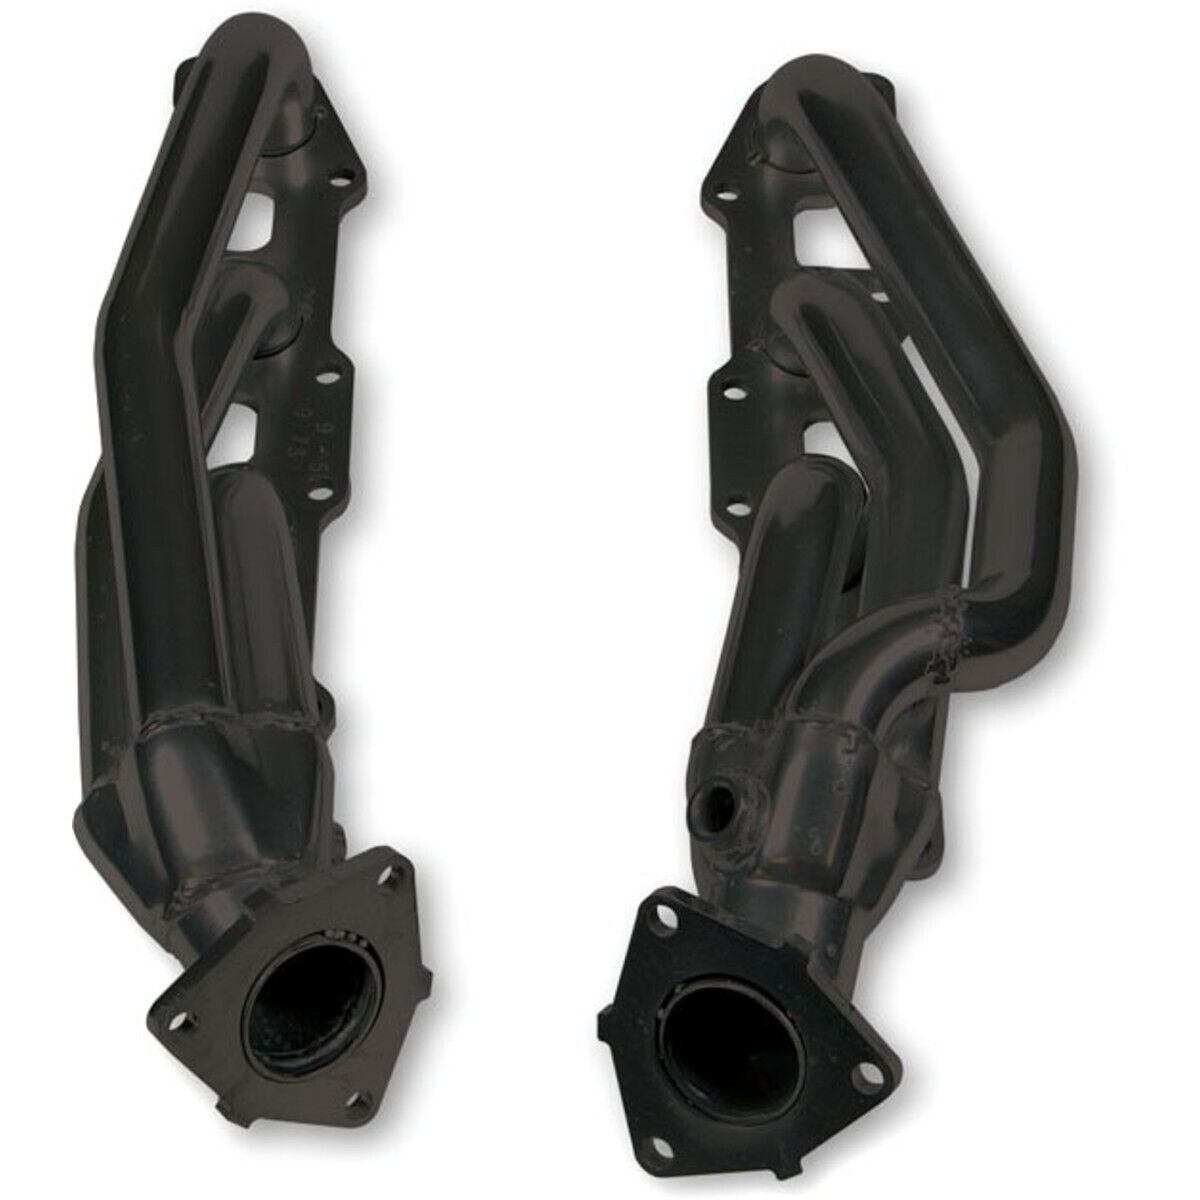 91730FLT Flowtech Headers Set of 2 for Toyota Tundra Sequoia 2001-2004 Pair